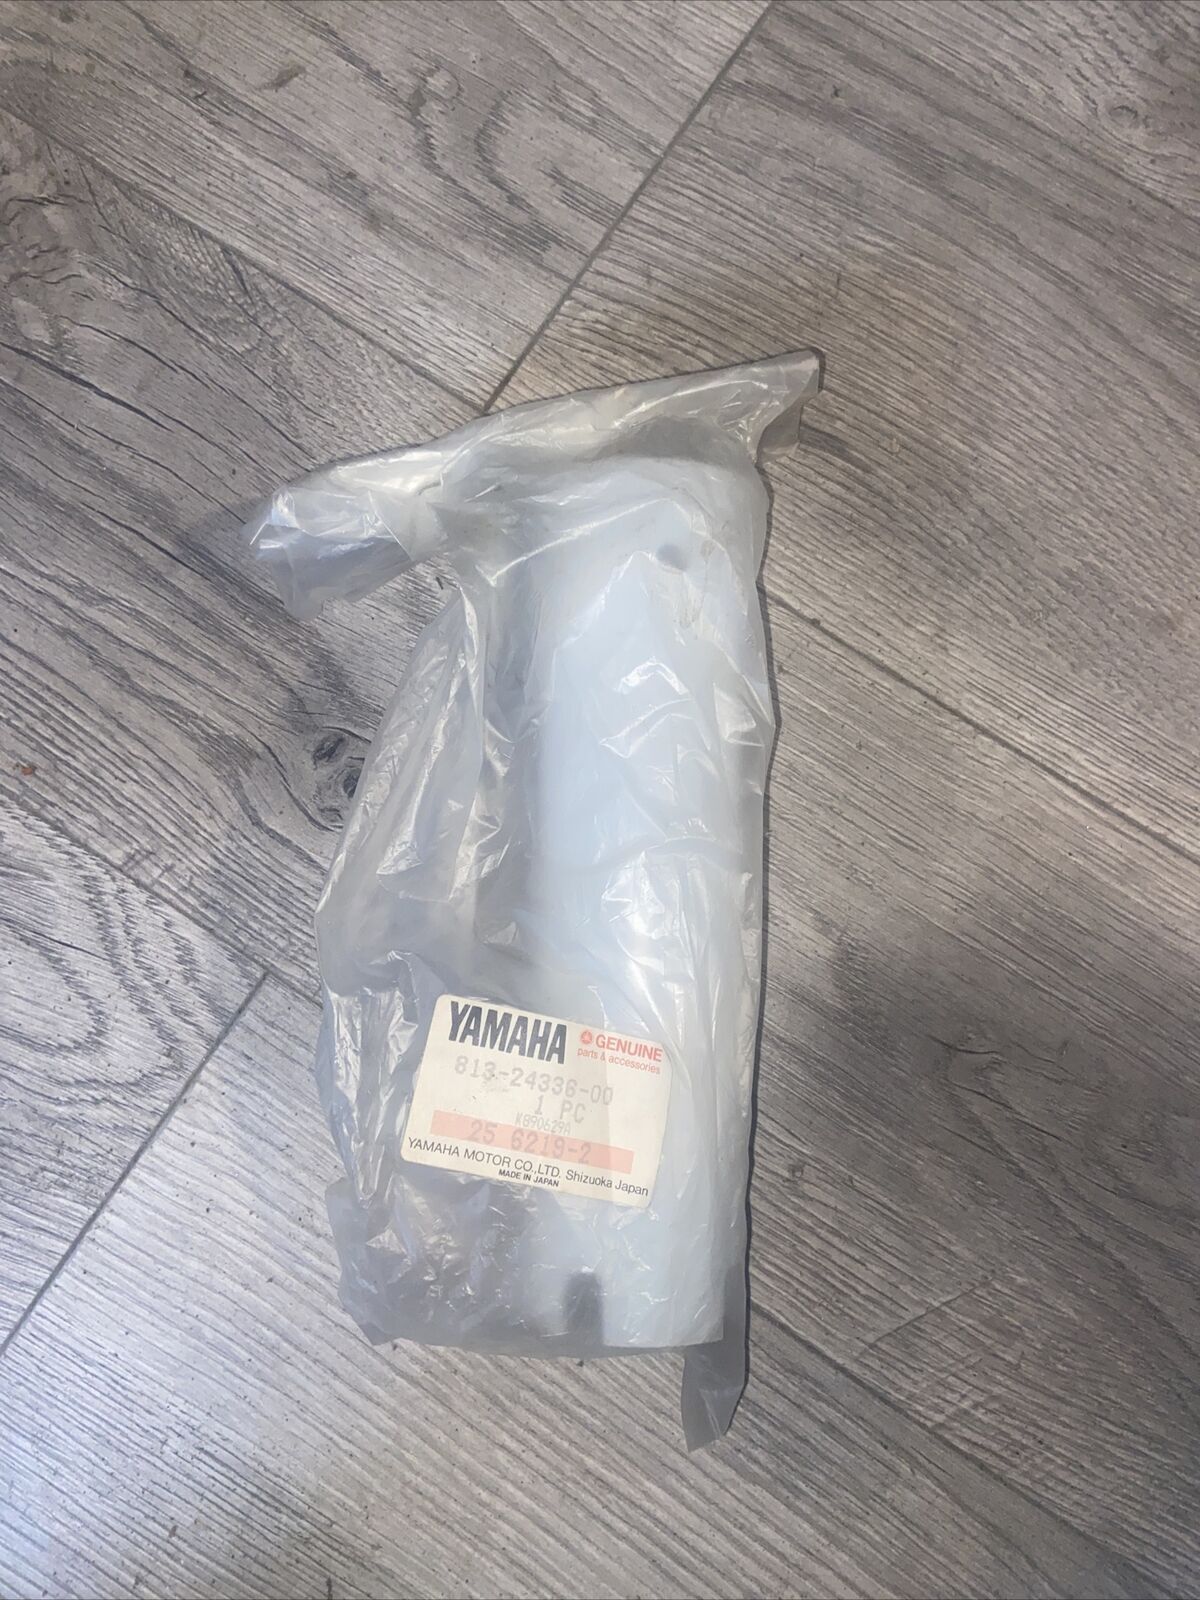 NOS OEM YAMAHA SNOWMOBILE SUCTION PIPE 2 813-24336-00